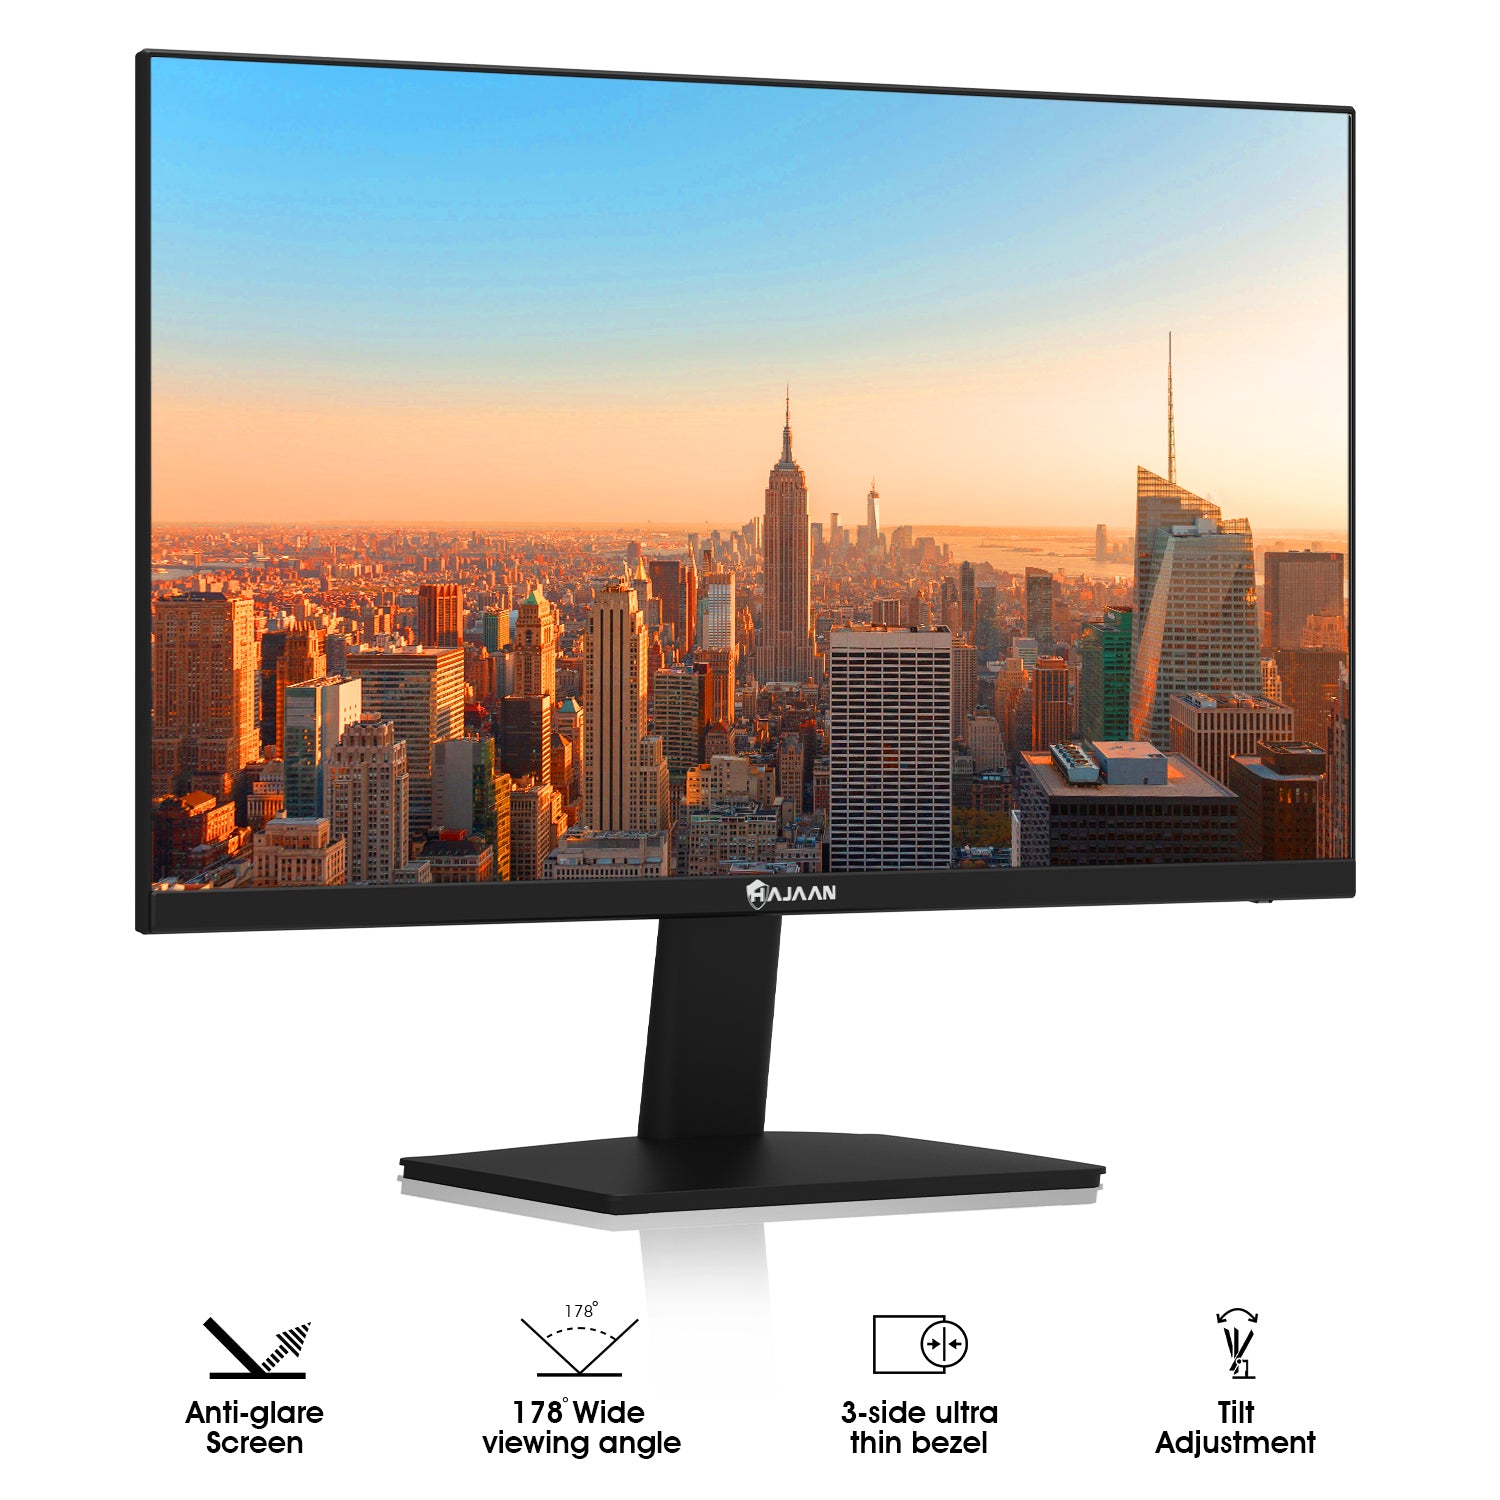 HAJAAN 24” FHD IPS Desktop Monitor, 75Hz Refresh Rate with Ultra Thin Bazel, Best for Office & Home, HDMI, VGA Ports | Monitor for PC, Wall Mountable, Black (S2424i)- 1 Year warranty